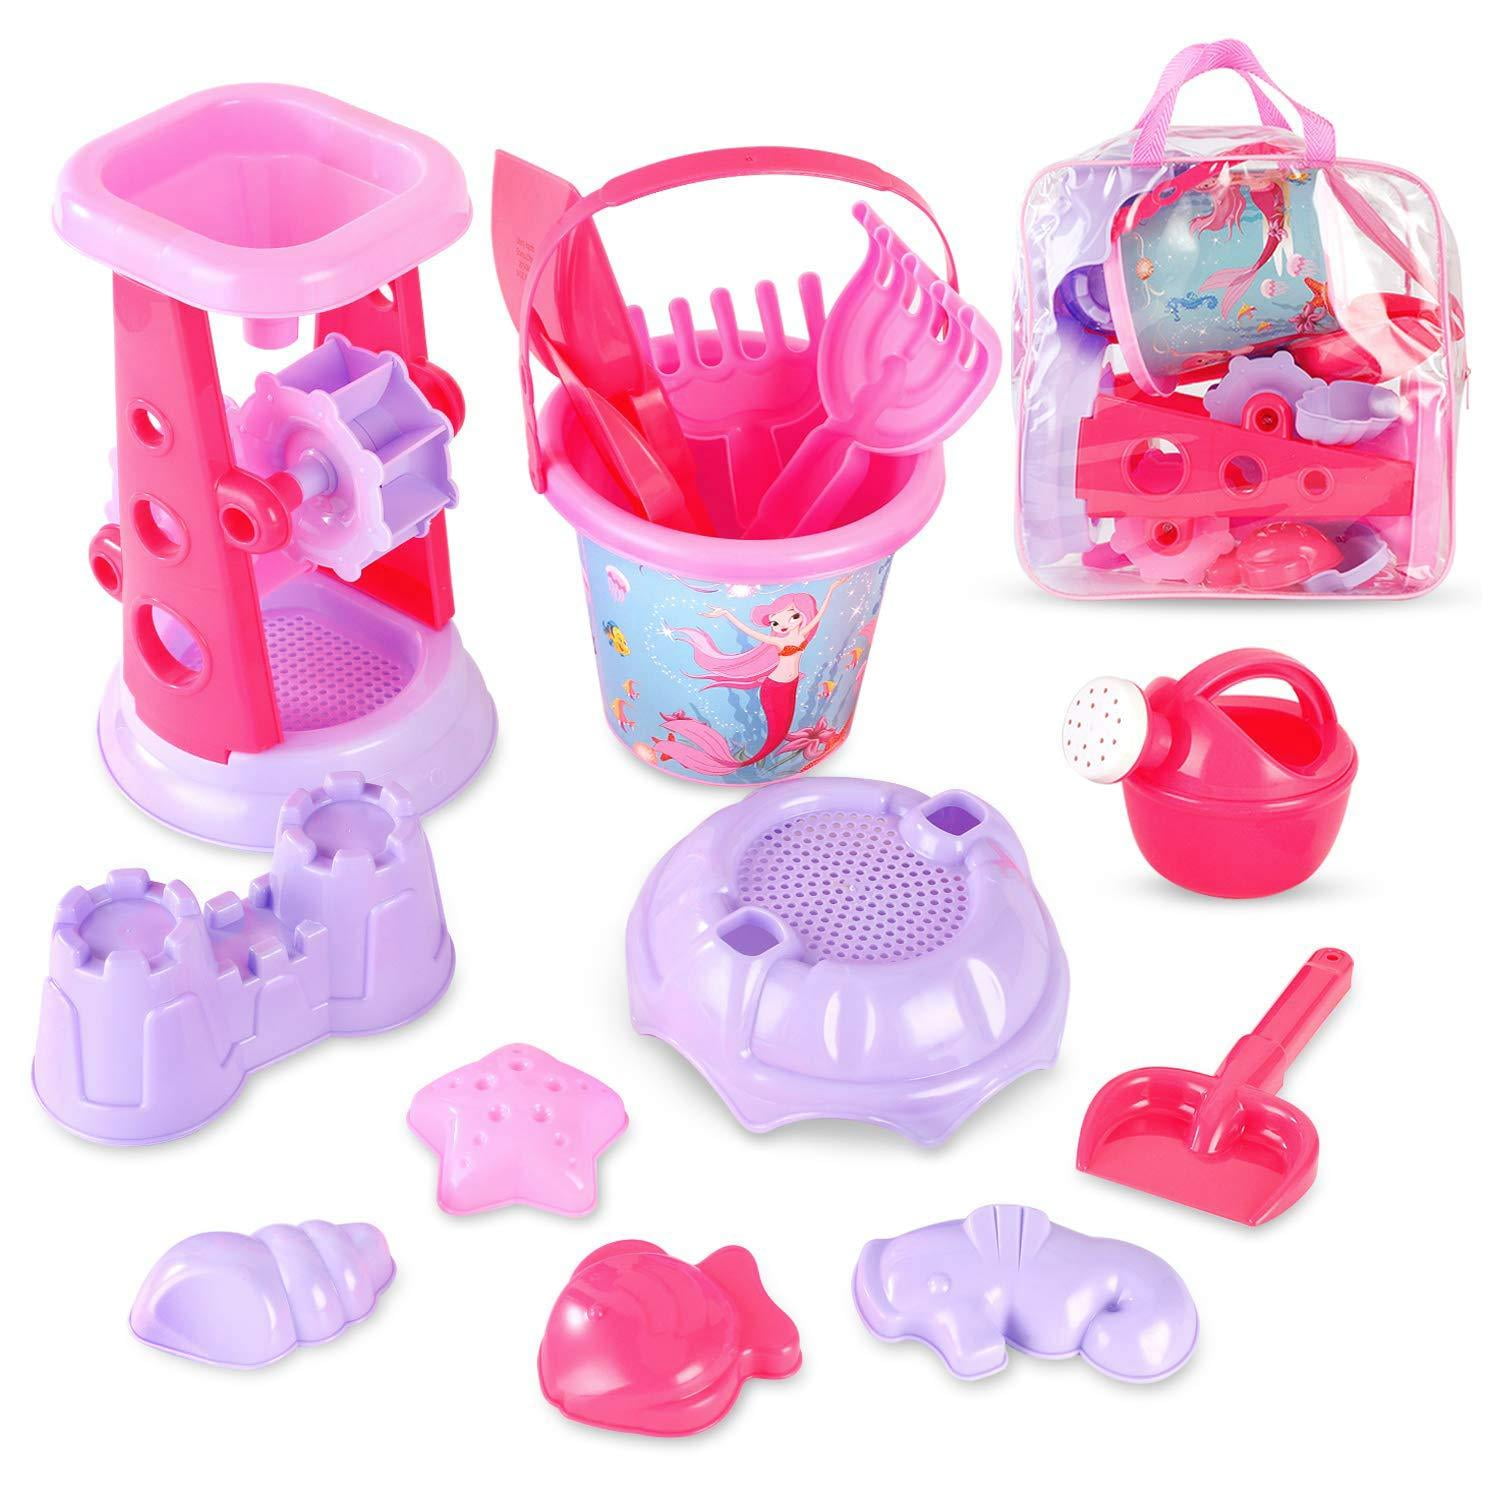 Liberty Imports Pink Princess Sand Wheel Beach Toy Set with Zippered Bag, 13 Pieces